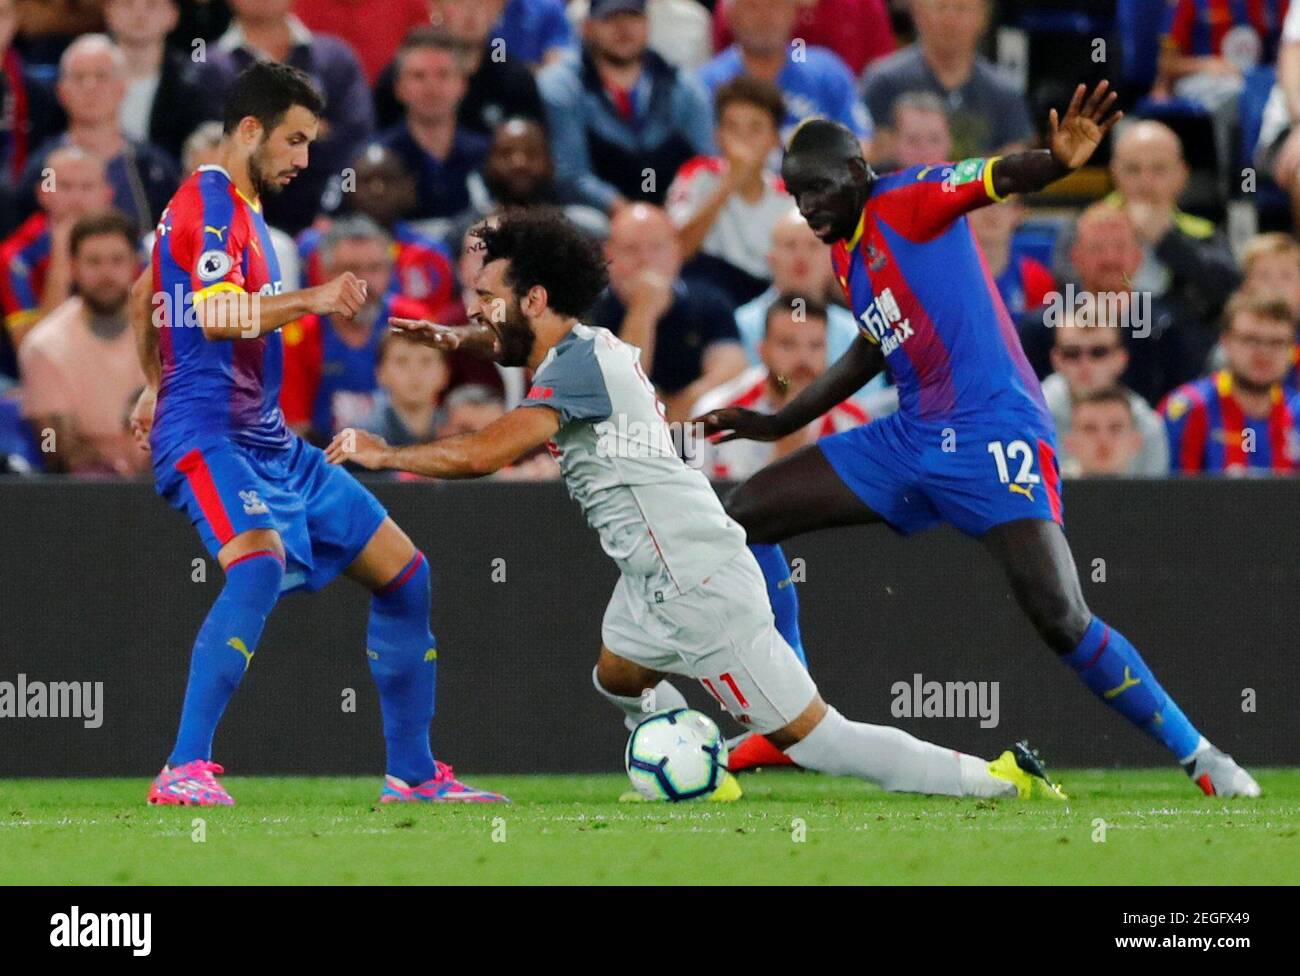 Soccer Football - Premier League - Crystal Palace v Liverpool - Selhurst Park, London, Britain - August 20, 2018  Crystal Palace's Mamadou Sakho concedes a penalty against Liverpool's Mohamed Salah                    REUTERS/Eddie Keogh  EDITORIAL USE ONLY. No use with unauthorized audio, video, data, fixture lists, club/league logos or "live" services. Online in-match use limited to 75 images, no video emulation. No use in betting, games or single club/league/player publications.  Please contact your account representative for further details. Stock Photo